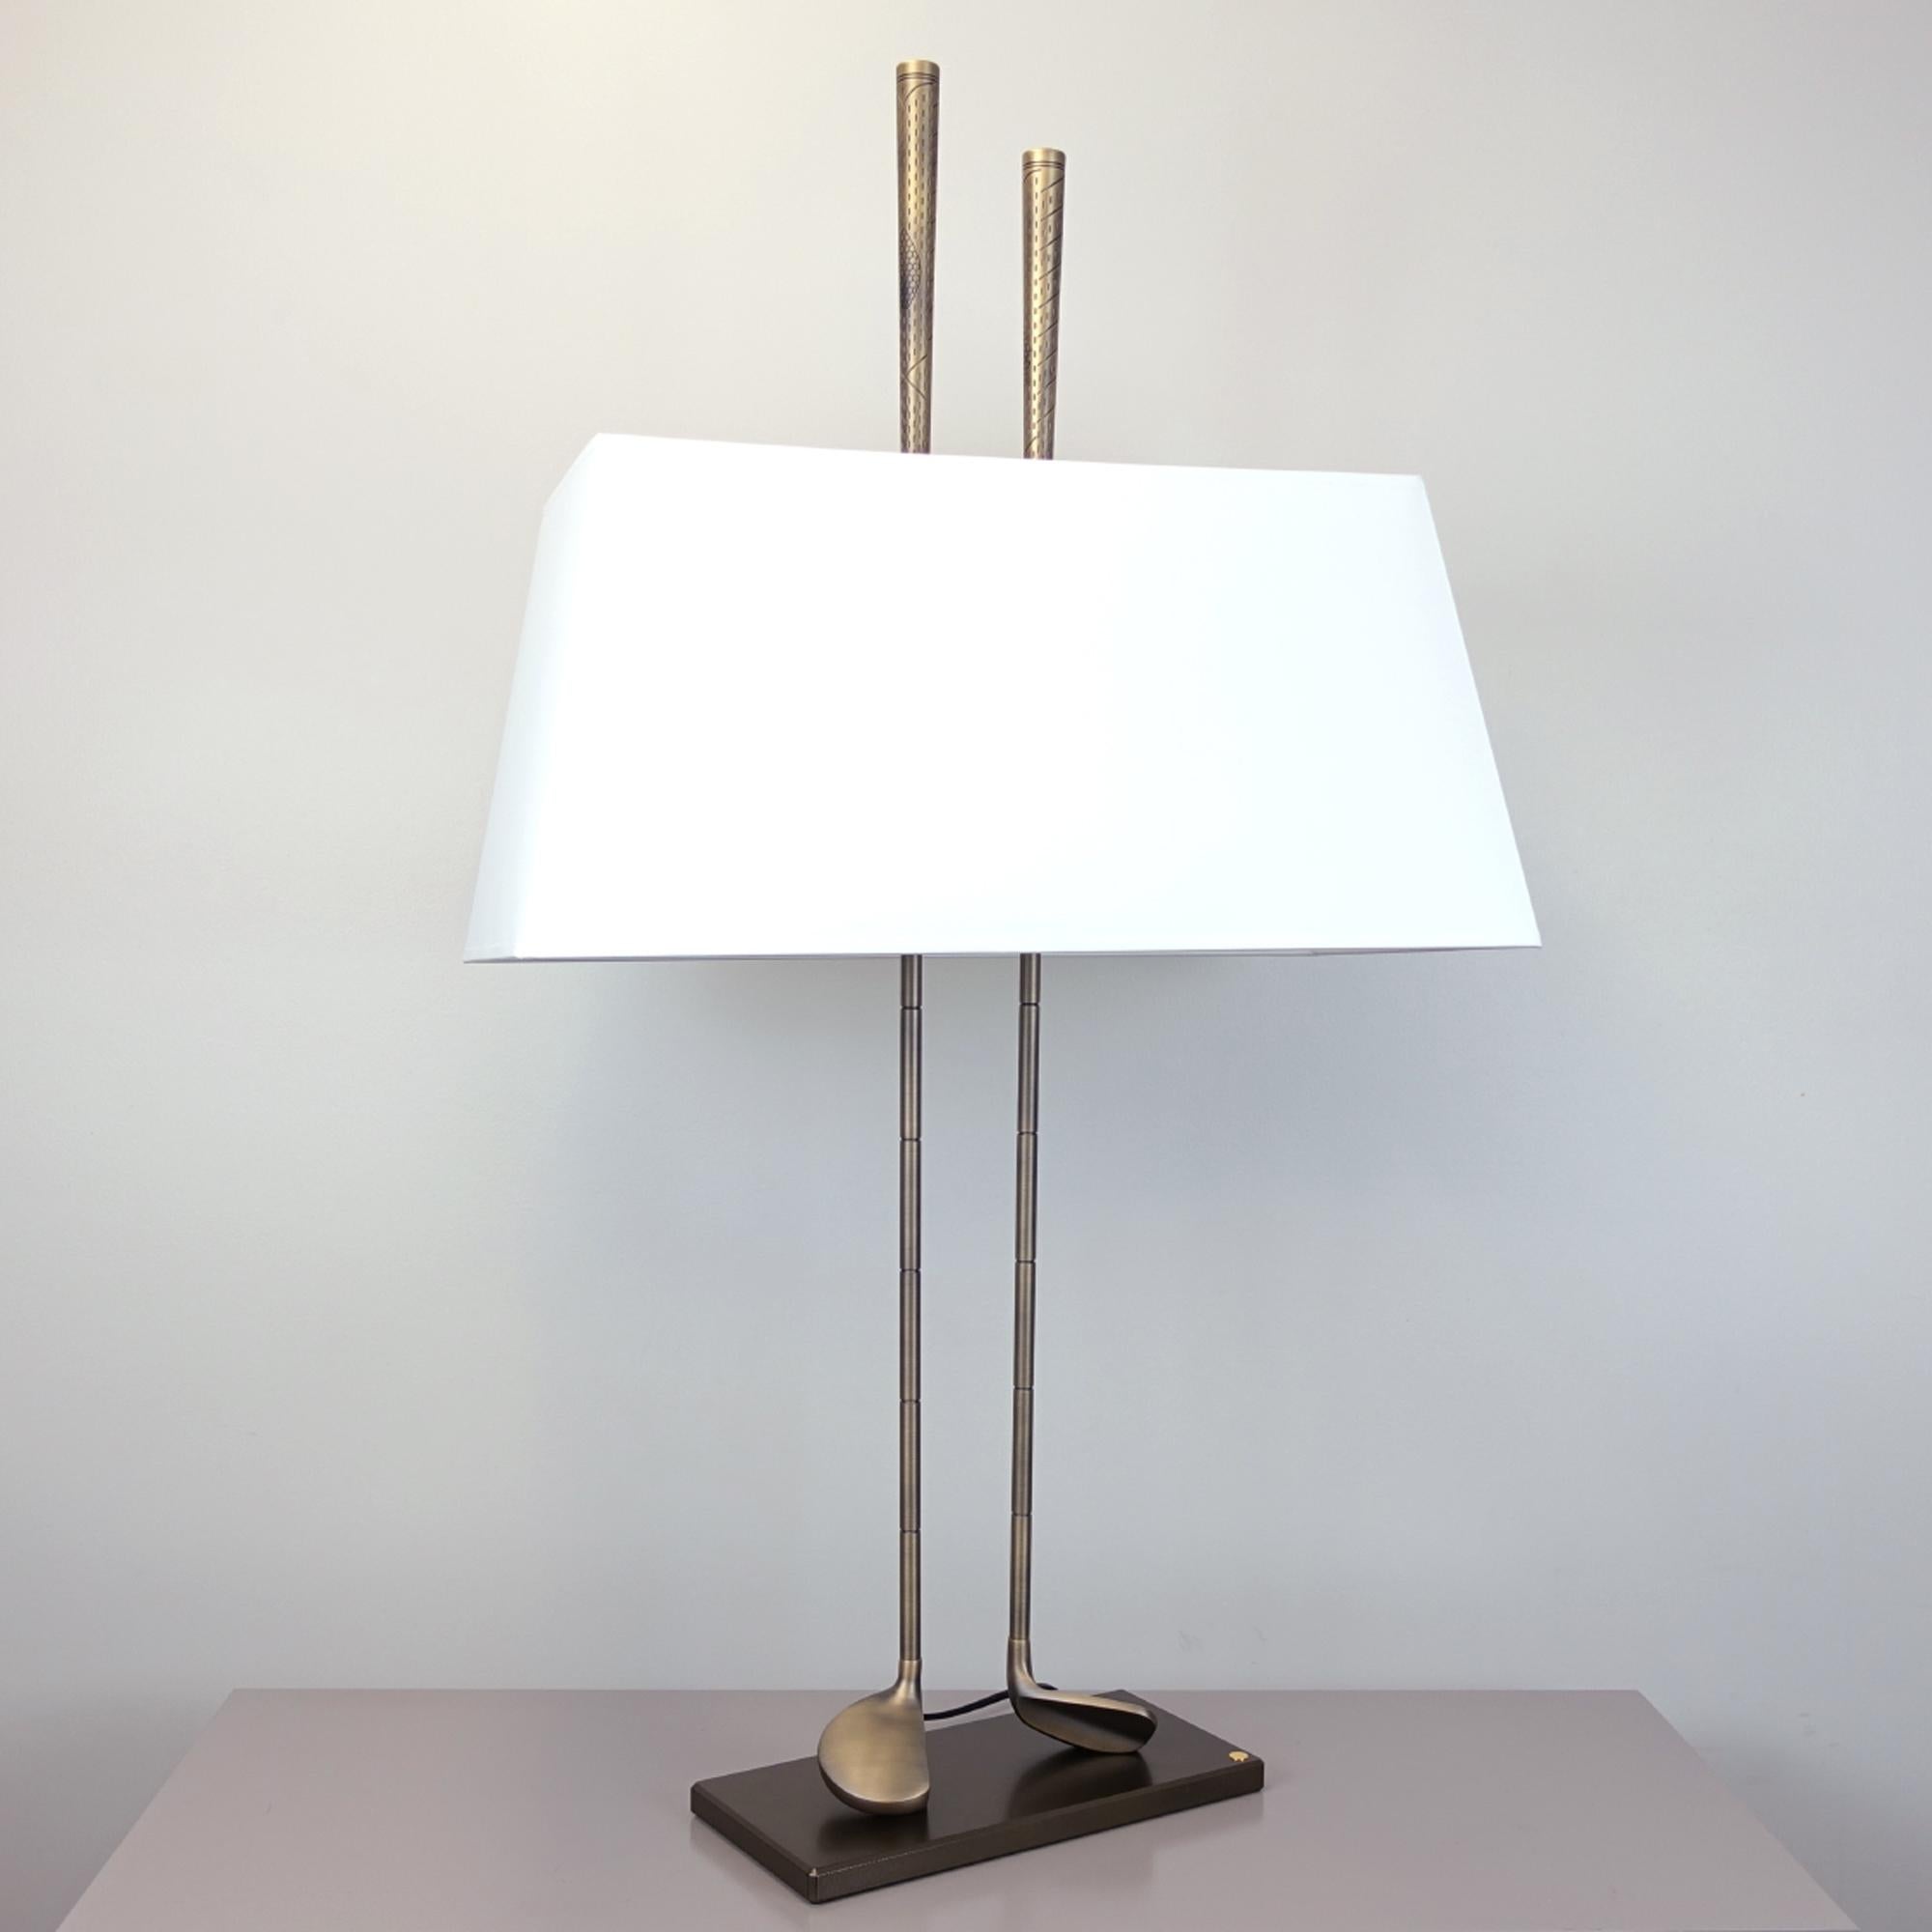 Table lamp golf club with 2 clubs in brass in
vintage brass finish. With white shade
included. 2 bulbs, lamp holder type E14,
max. Limited edition. Edition of 100 pieces.
Made in France.
With customizable plaque to write a name
or a company,